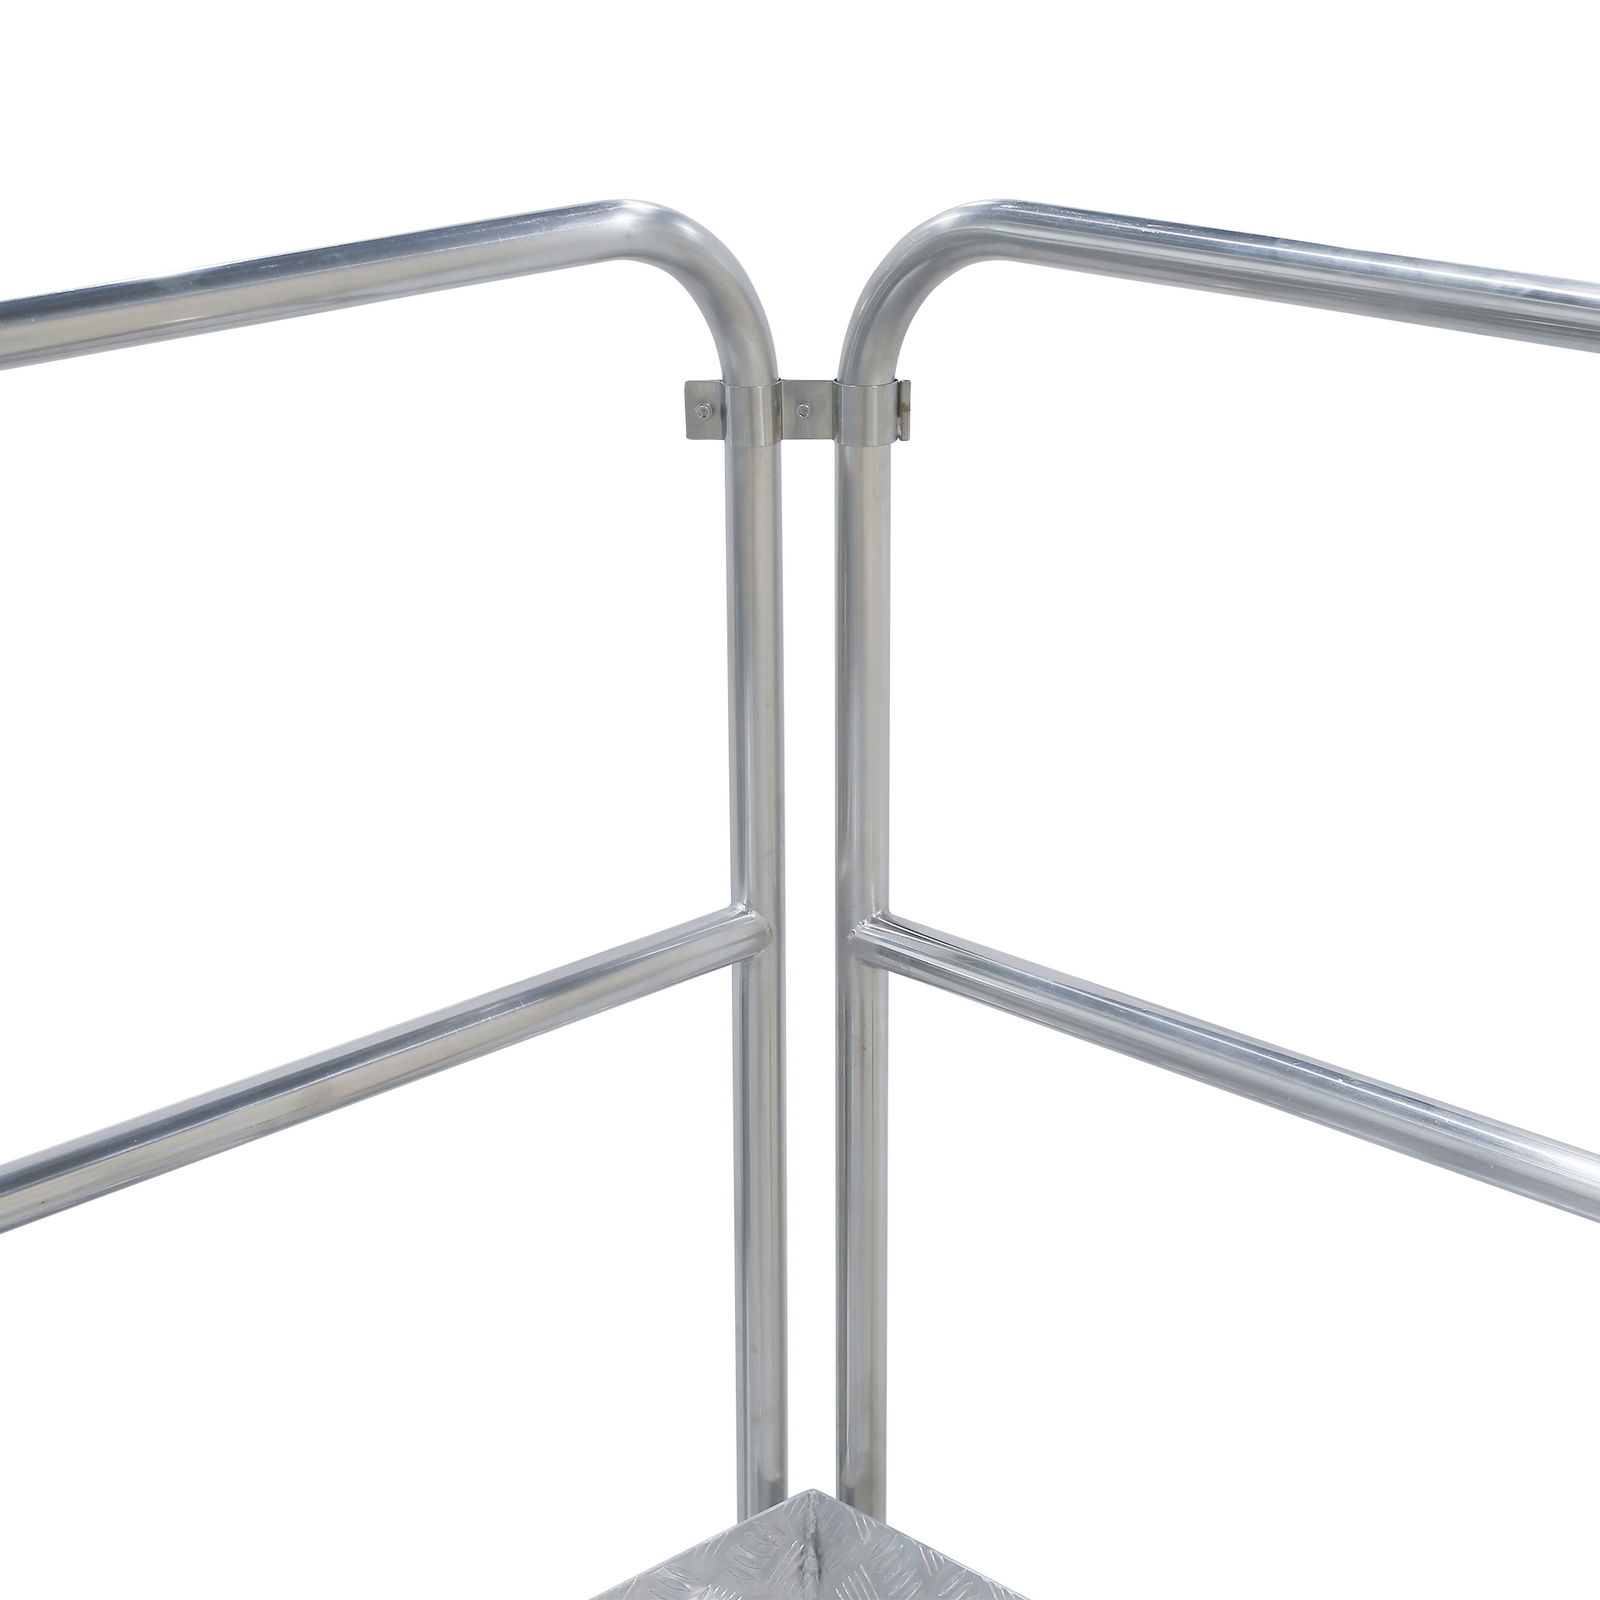 closeup of the handrails of the JORES TECHNOLOGIES® stainless steel combination weigher platform